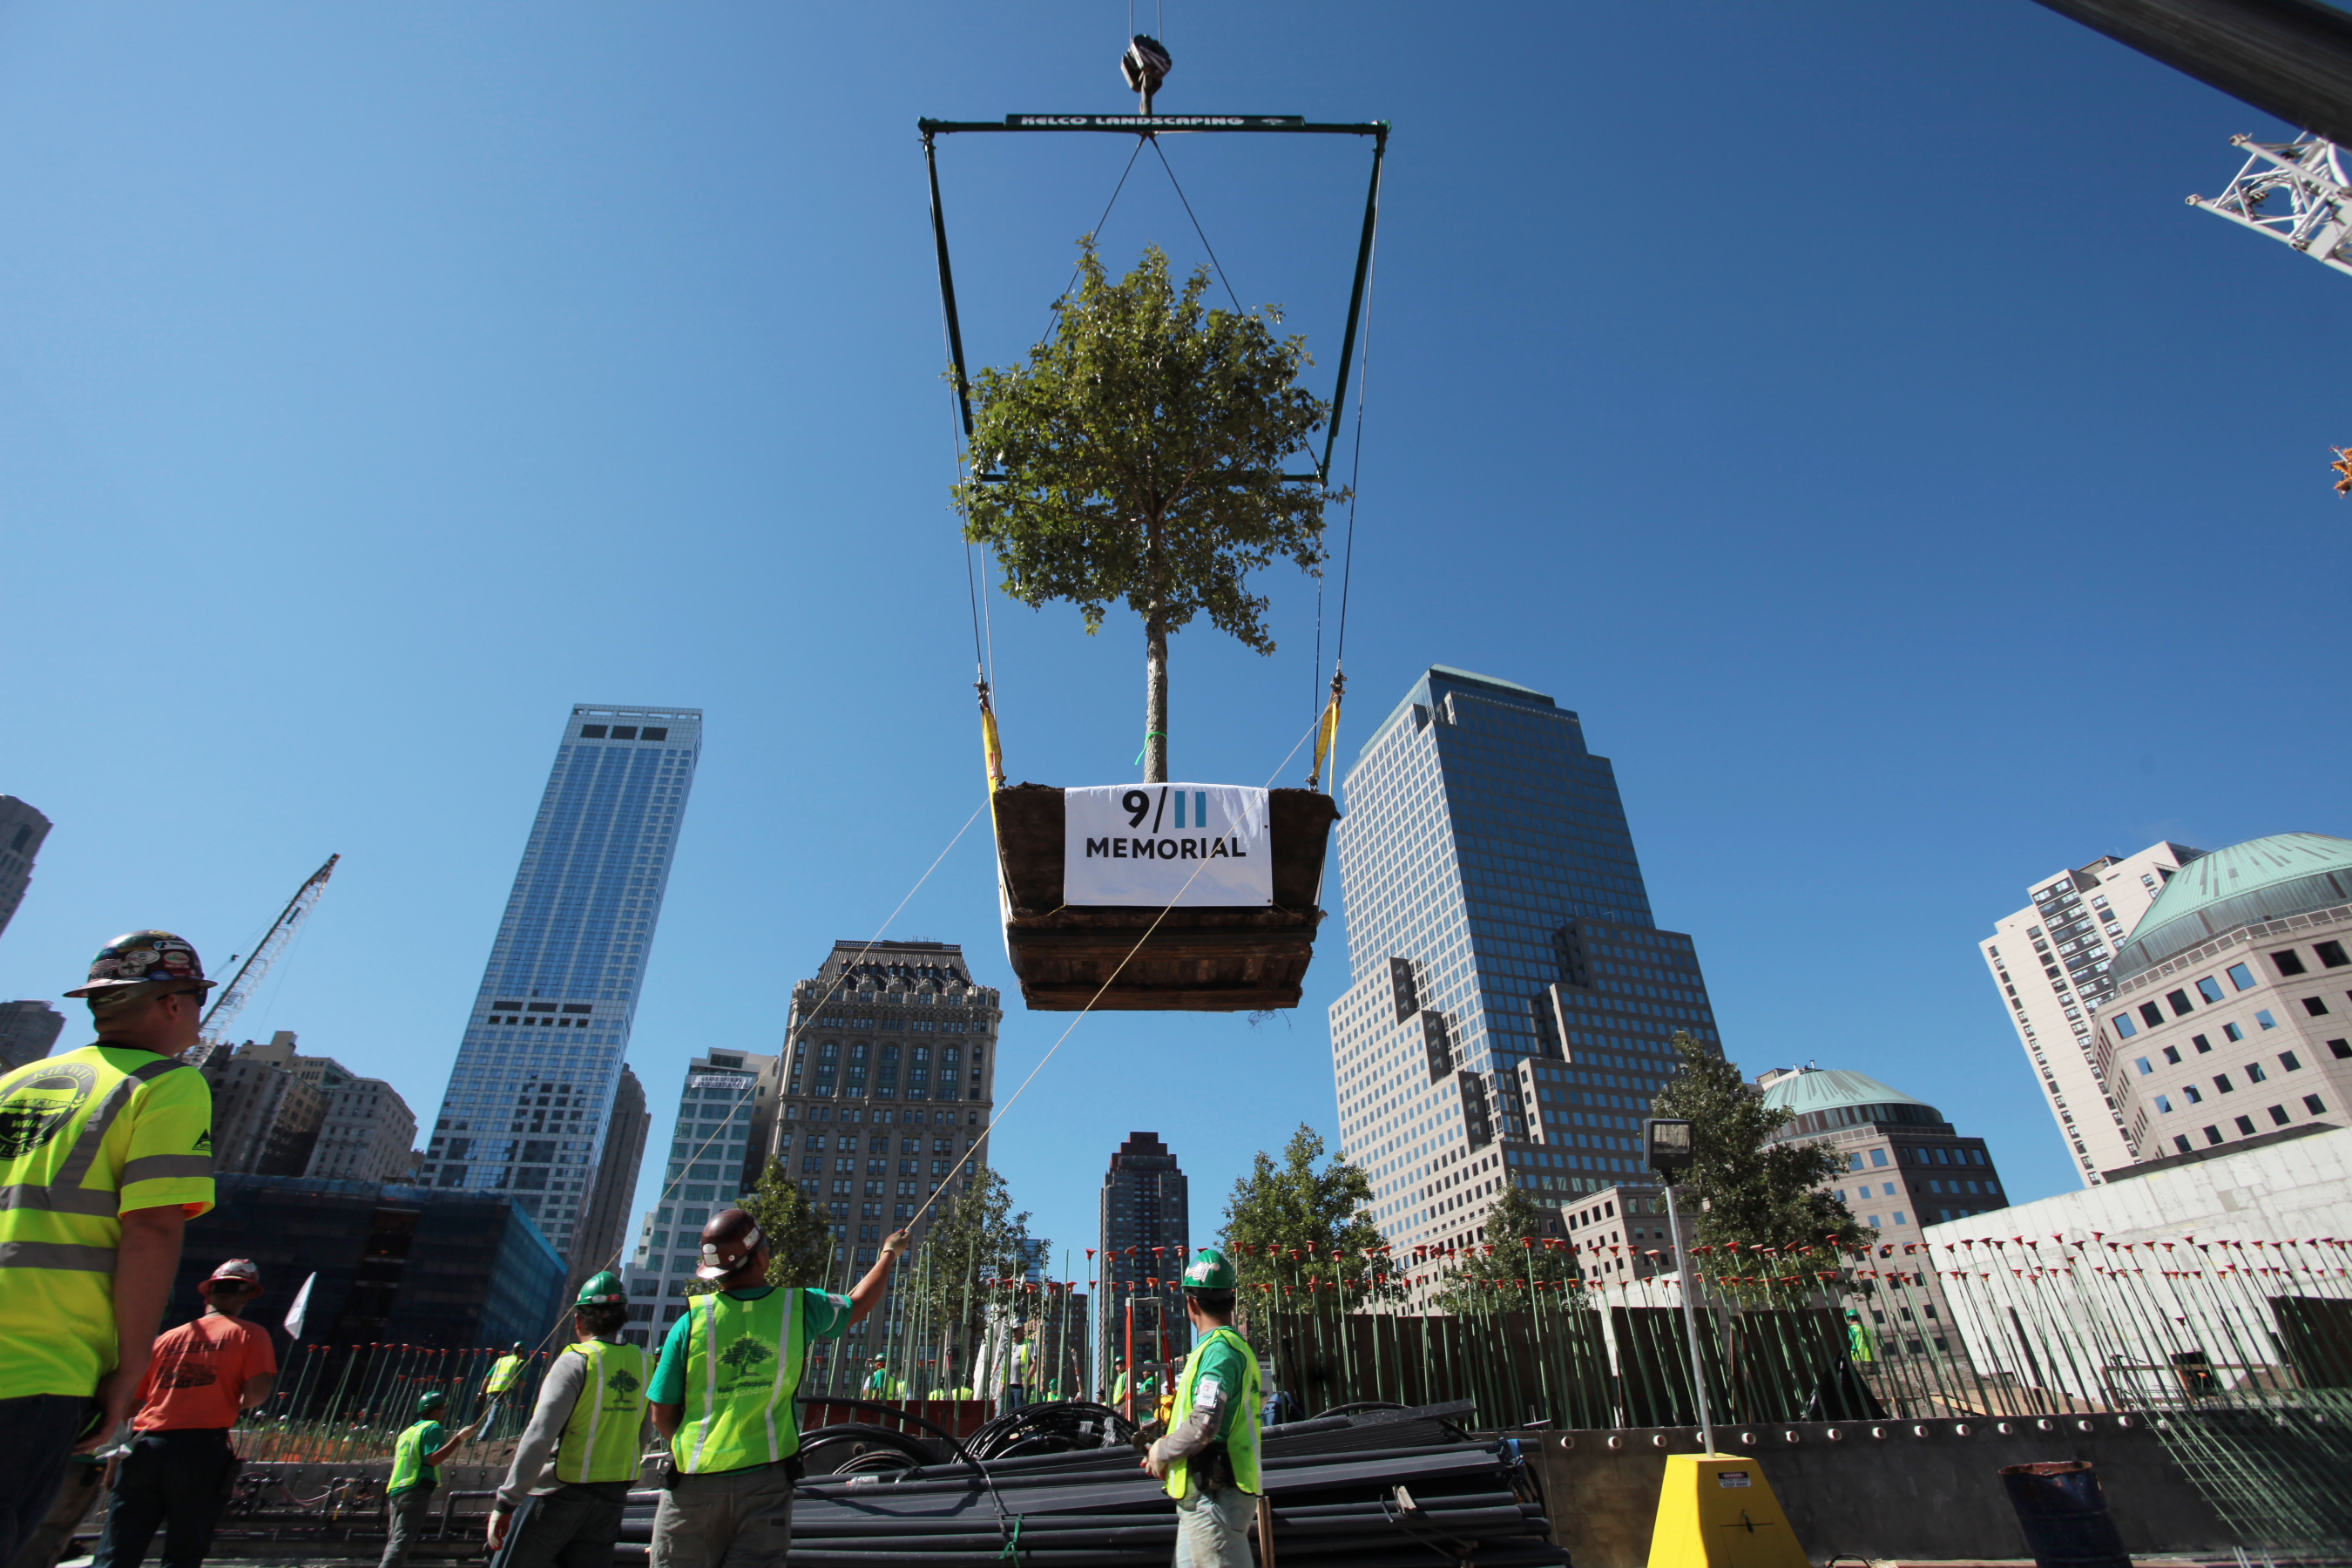 A swamp white oak tree is lowered onto the 9/11 Memorial plaza on a sunny day in August 2010.